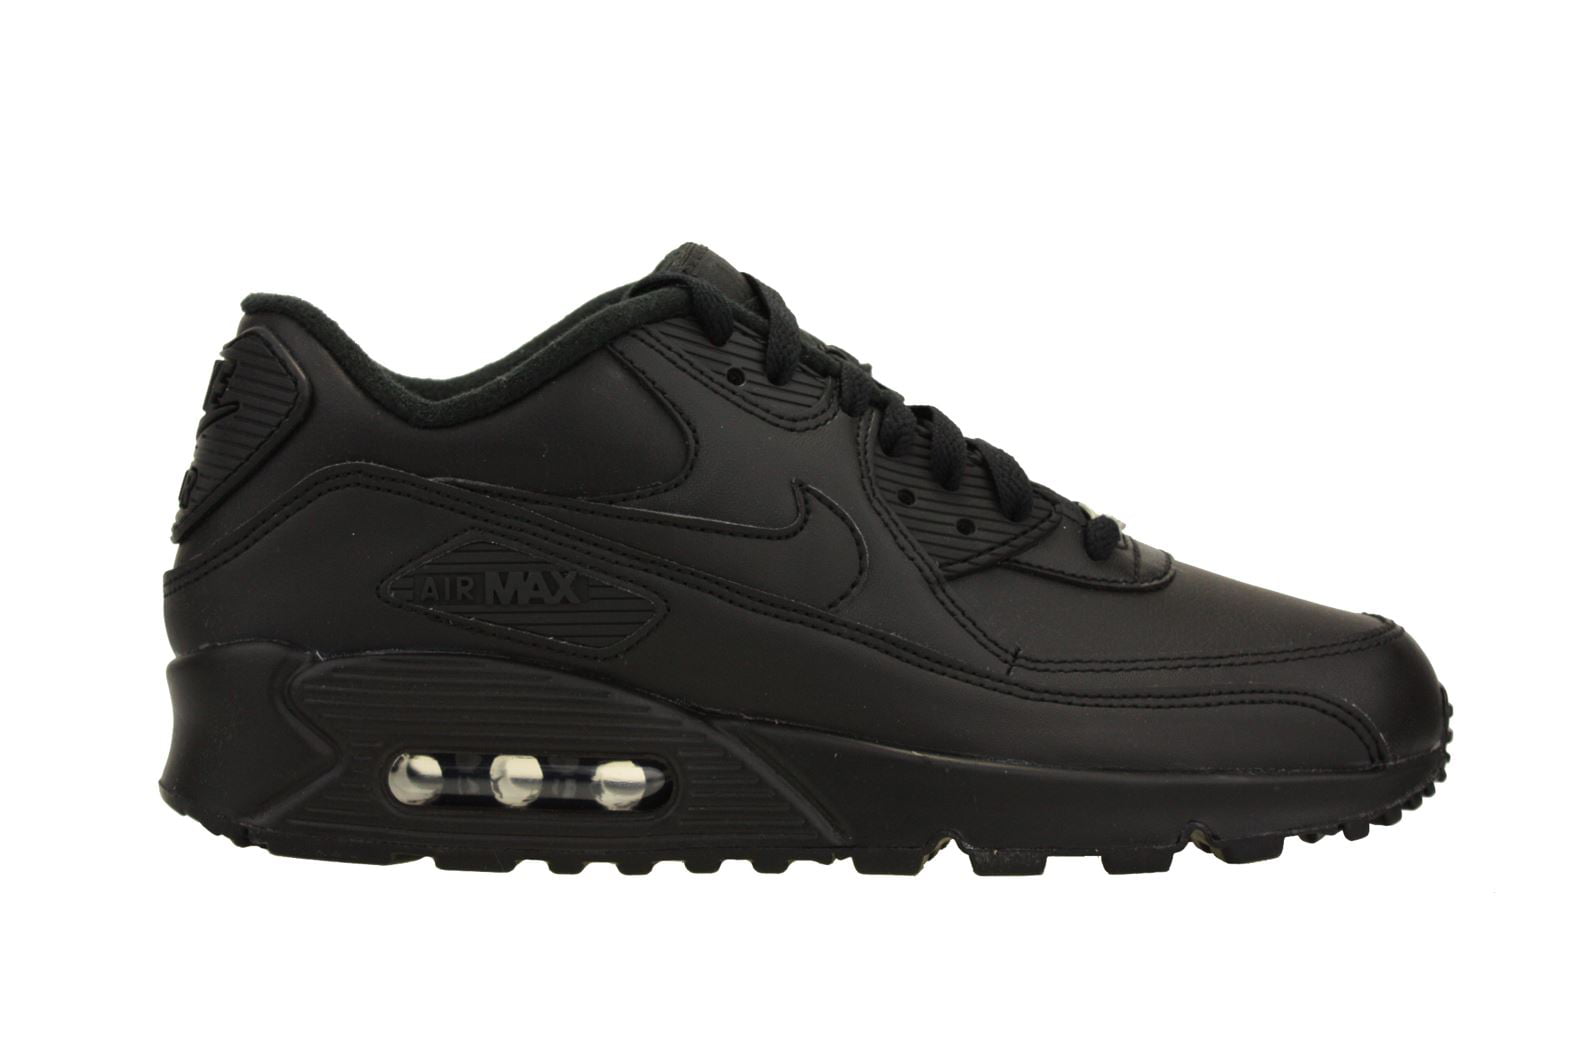 Nike - Nike Mens Air Max 90 Leather Running Shoes Black ...